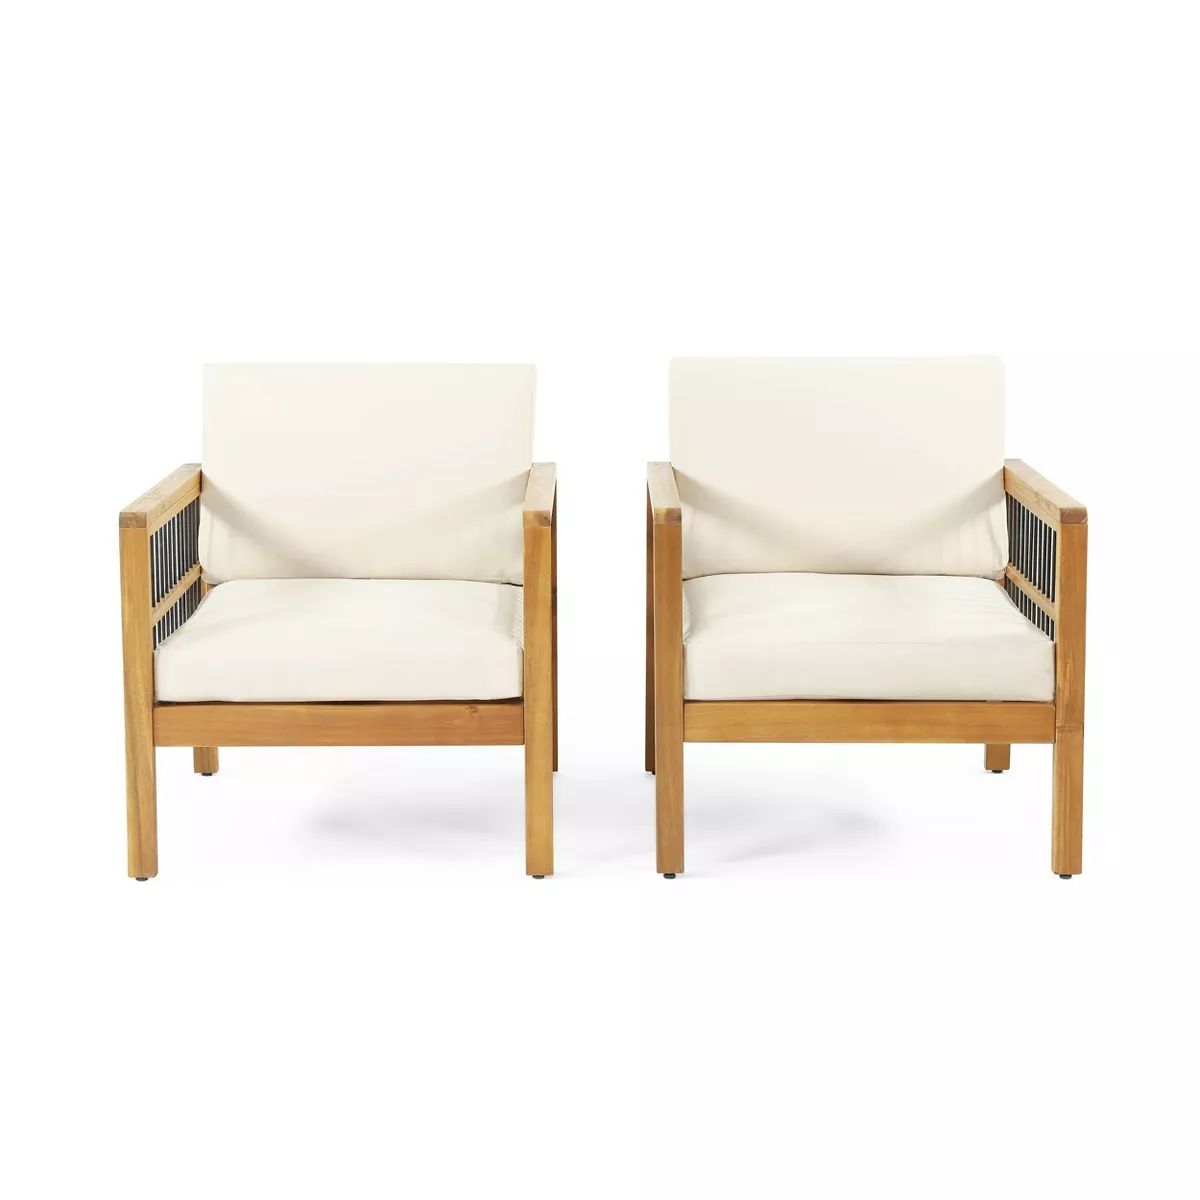 2pk Elias Outdoor Acacia Wood Club Chairs with Cushions Teak/Beige - Christopher Knight Home | Target